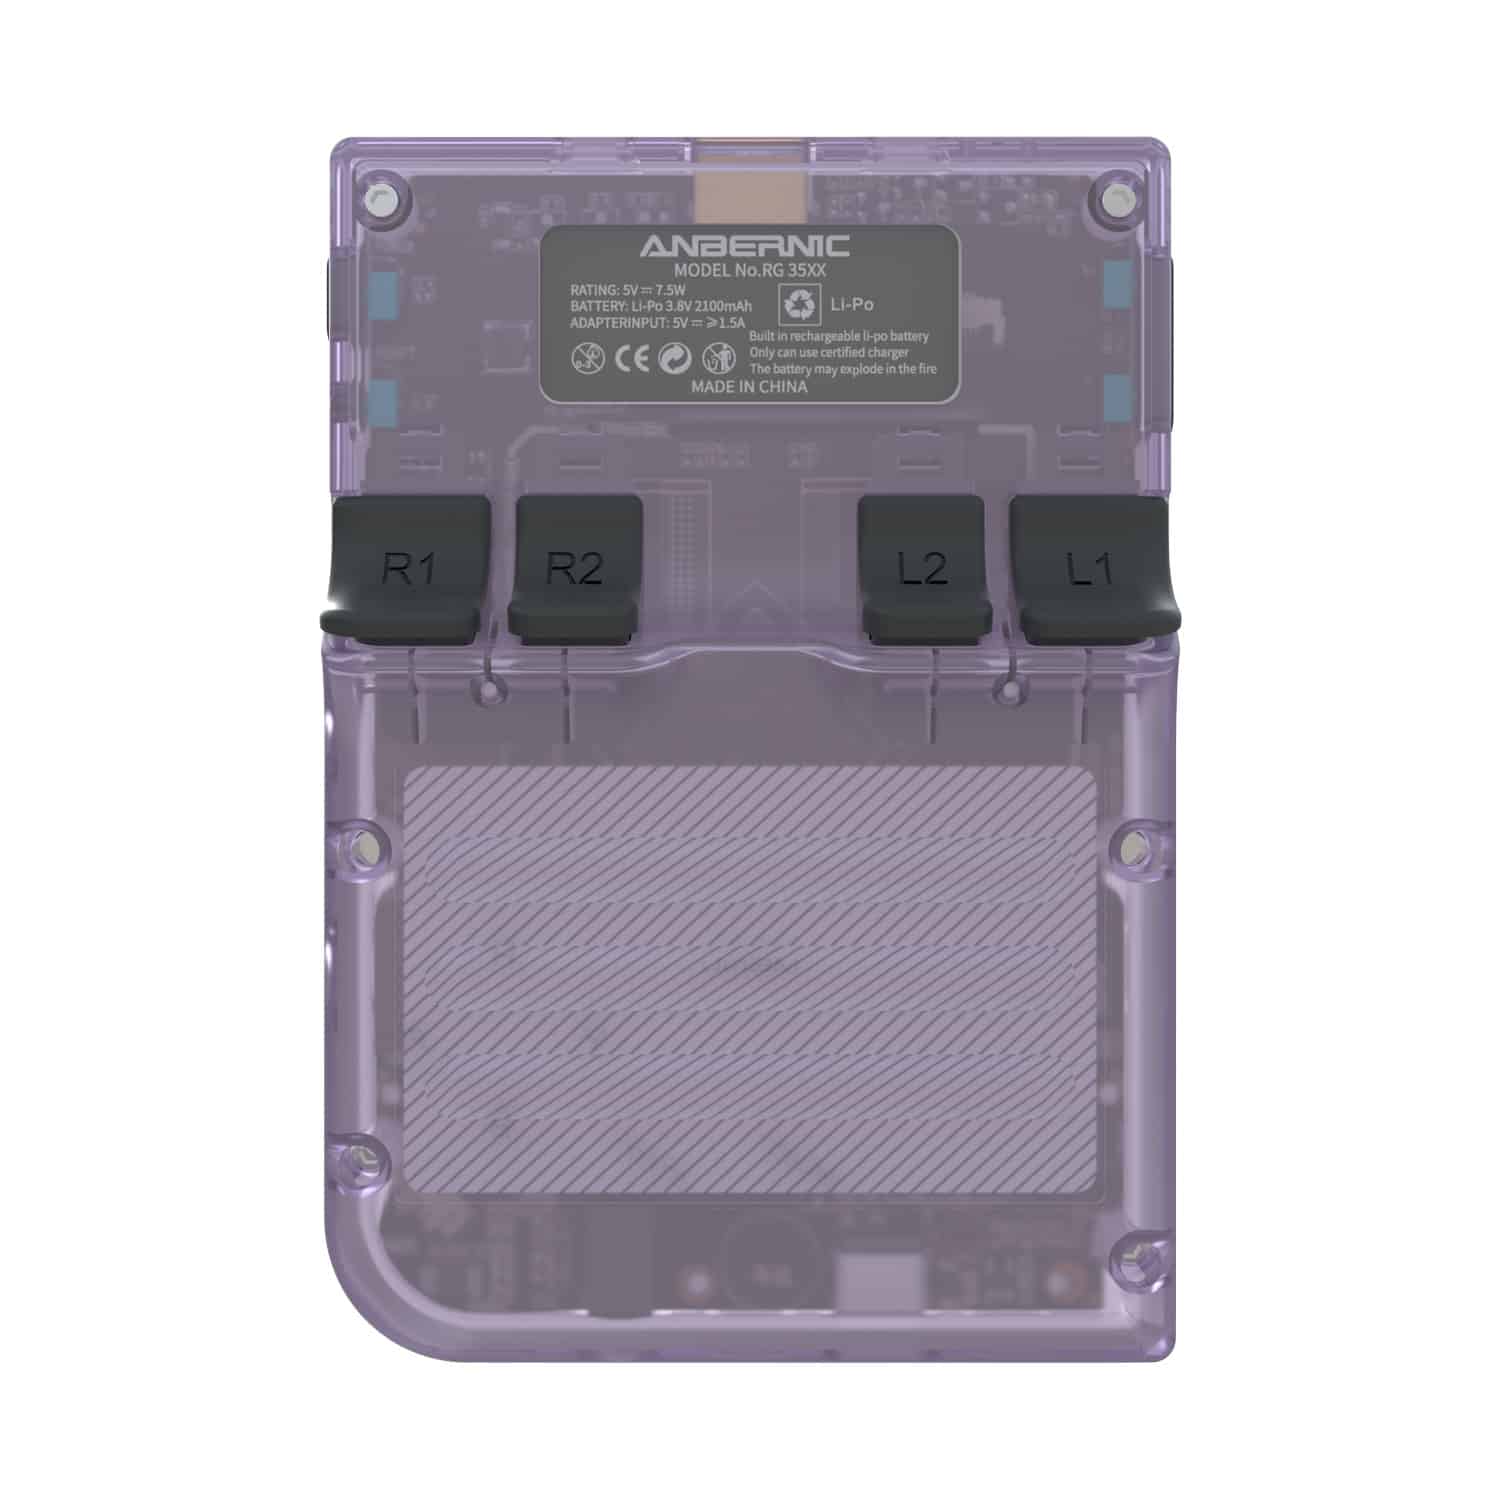 ANBERNIC RG35XX Purple Clear Back of the device